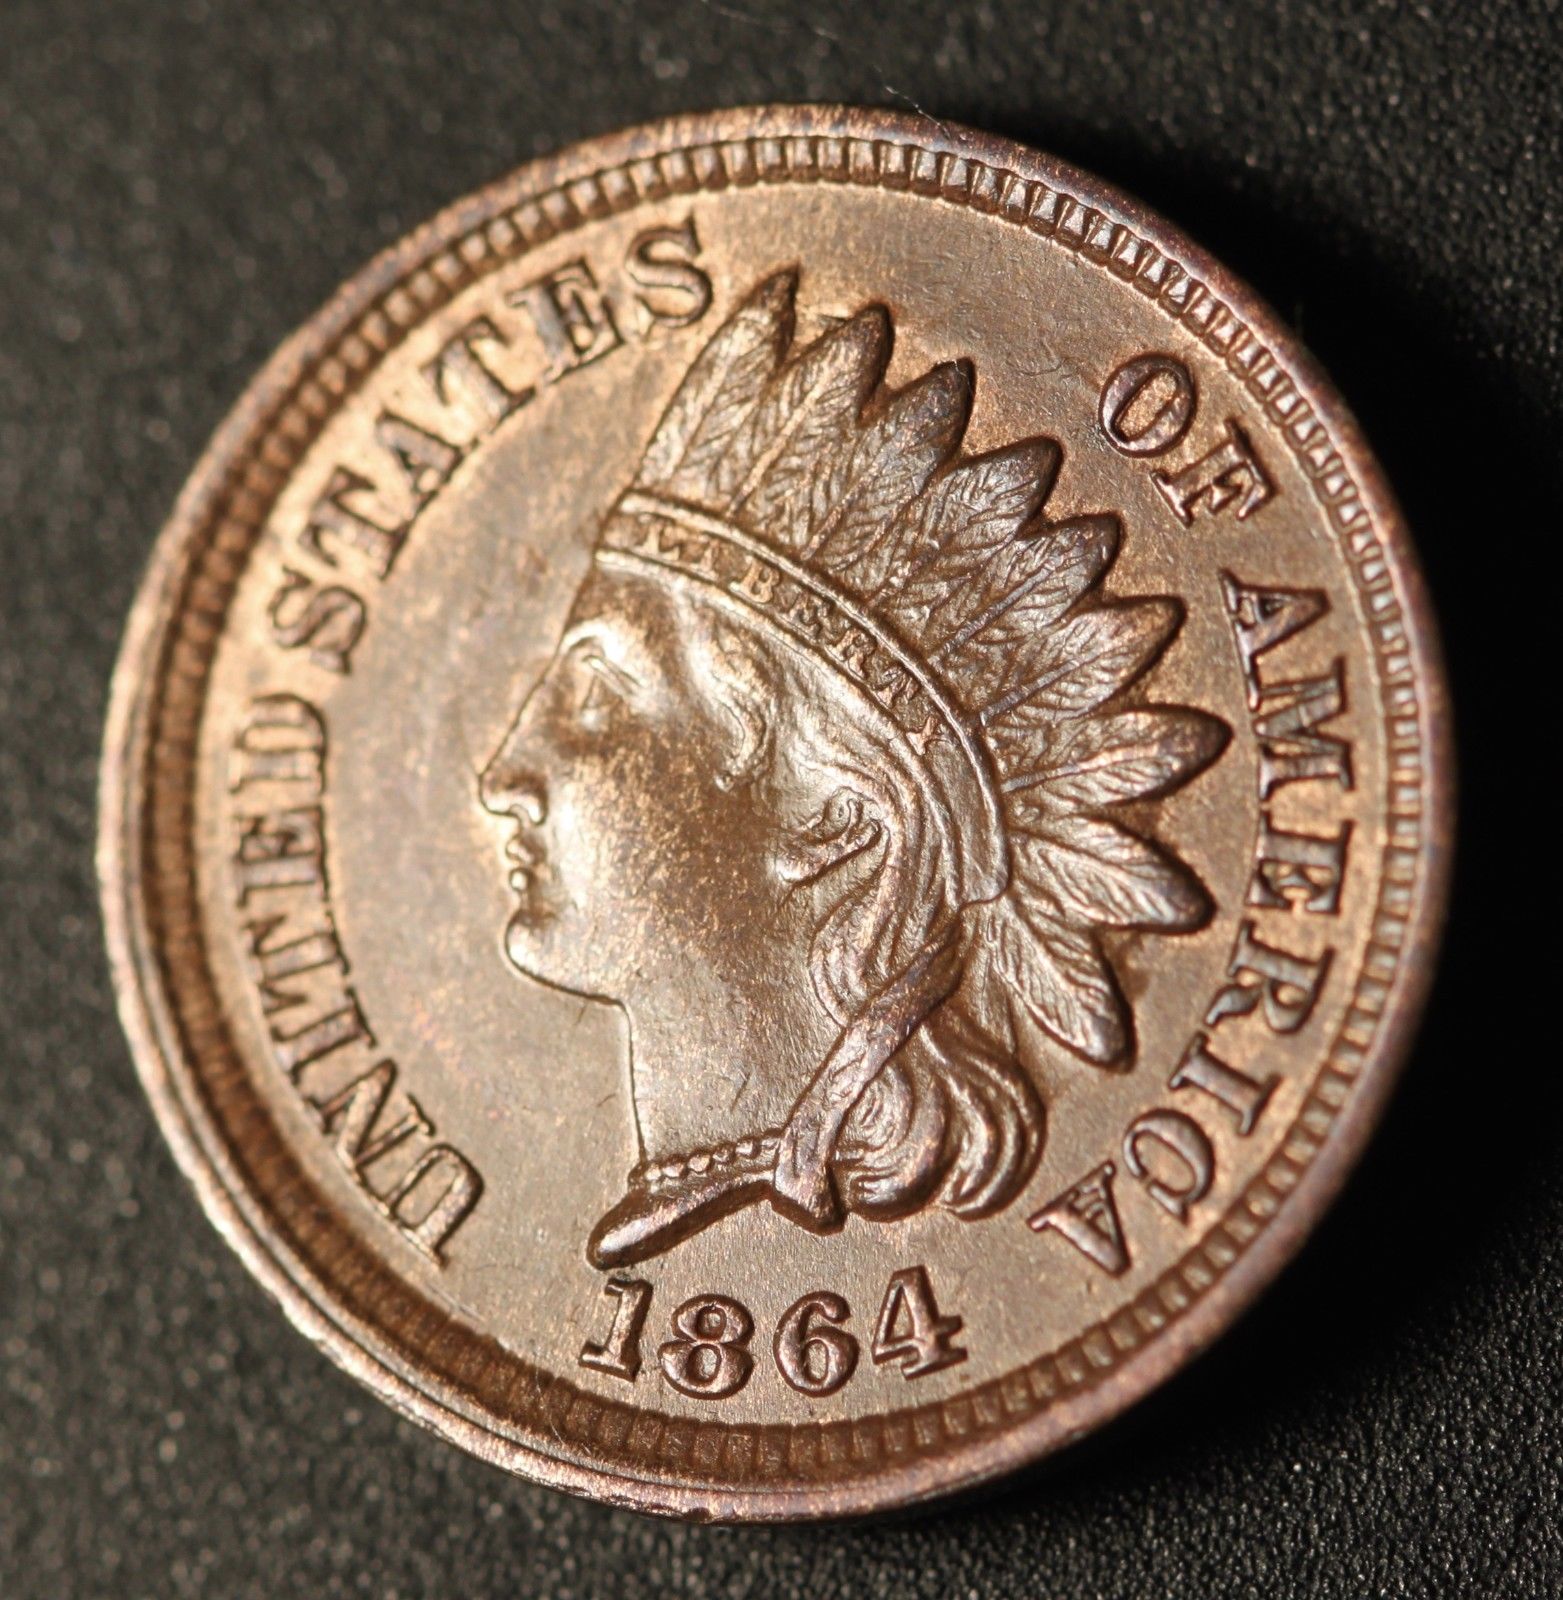 1864 No-L RPD-006 - Indian Head Penny - Photo by Ed Nathanson